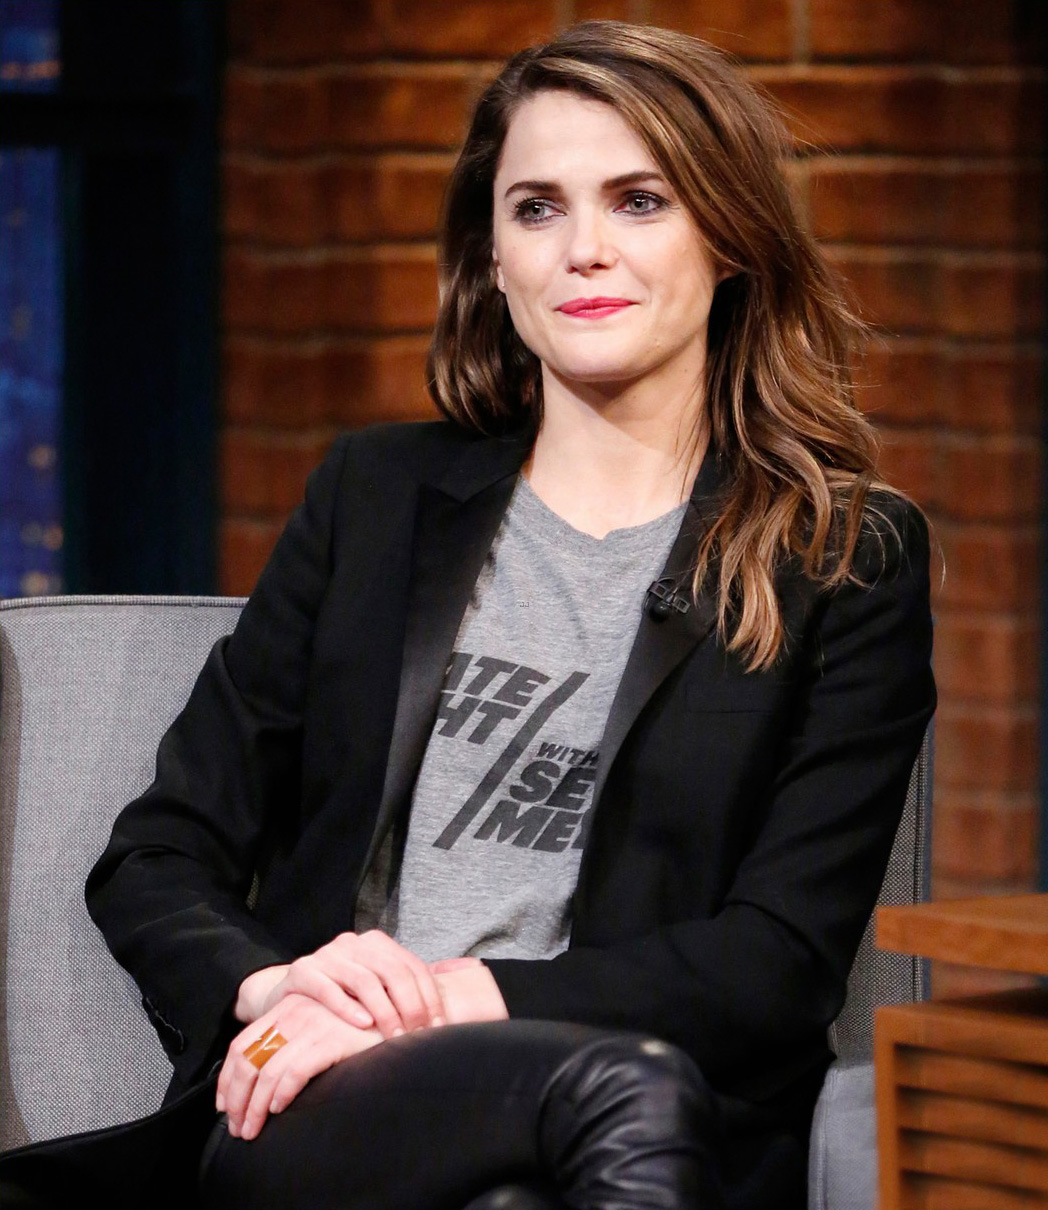 Keri Russell appearance on Late Night with Seth Meyers